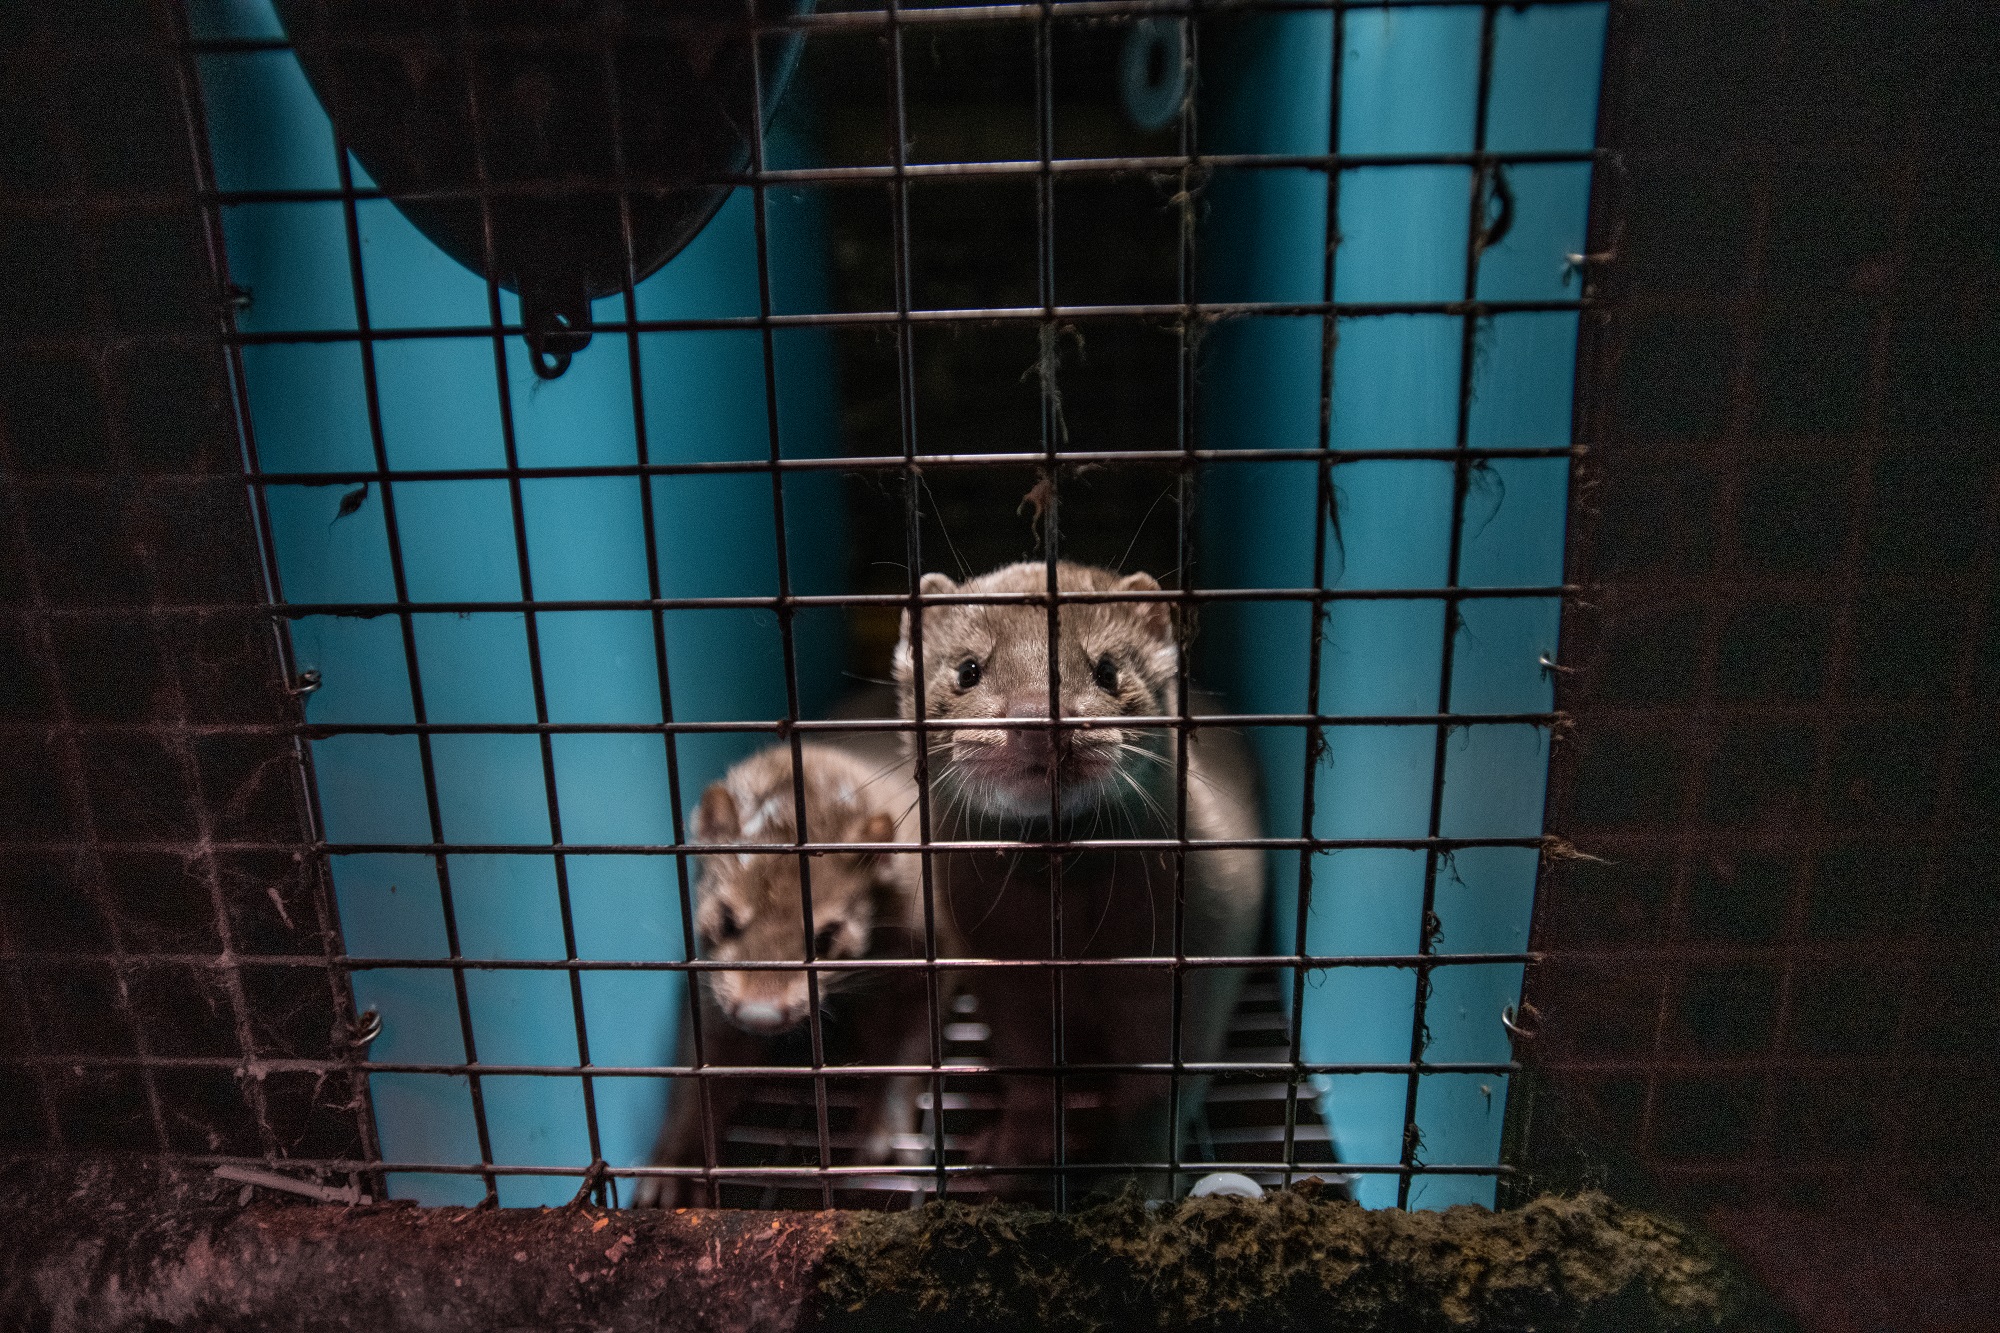 Two mink stare out through the wire mesh of their barren cage at a fur farm in Quebec, Canada. Their enclosure contains no nest or bedding.